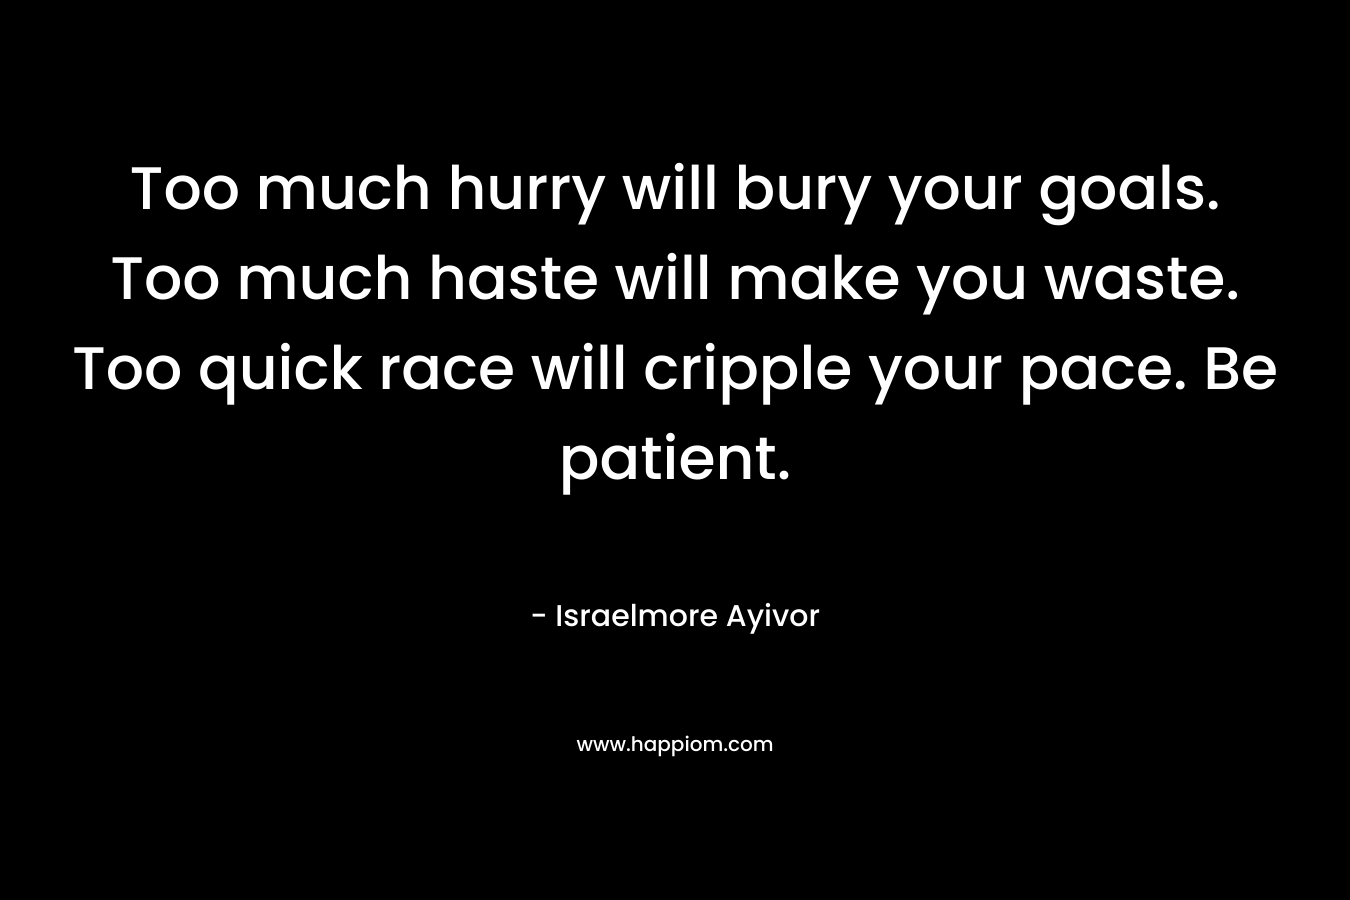 Too much hurry will bury your goals. Too much haste will make you waste. Too quick race will cripple your pace. Be patient. – Israelmore Ayivor